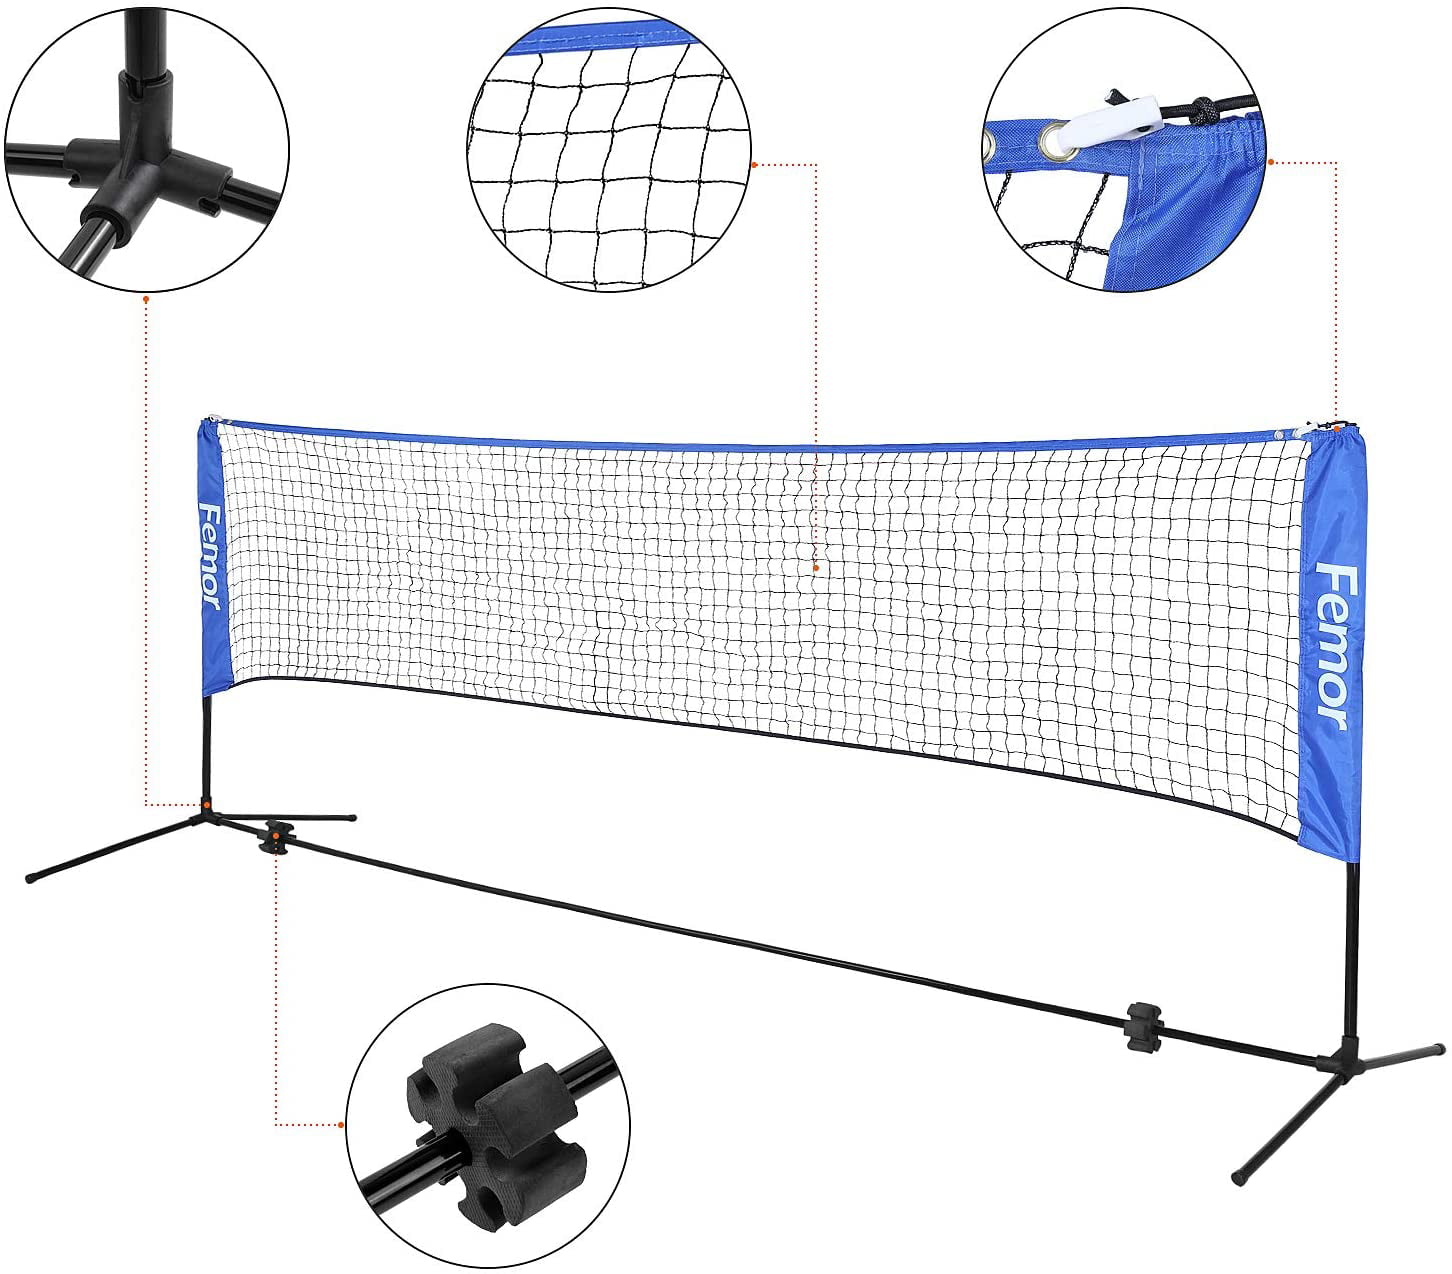 Tennis femor Badminton Net Set with Posts 4m Foldable and Adjustable Height 